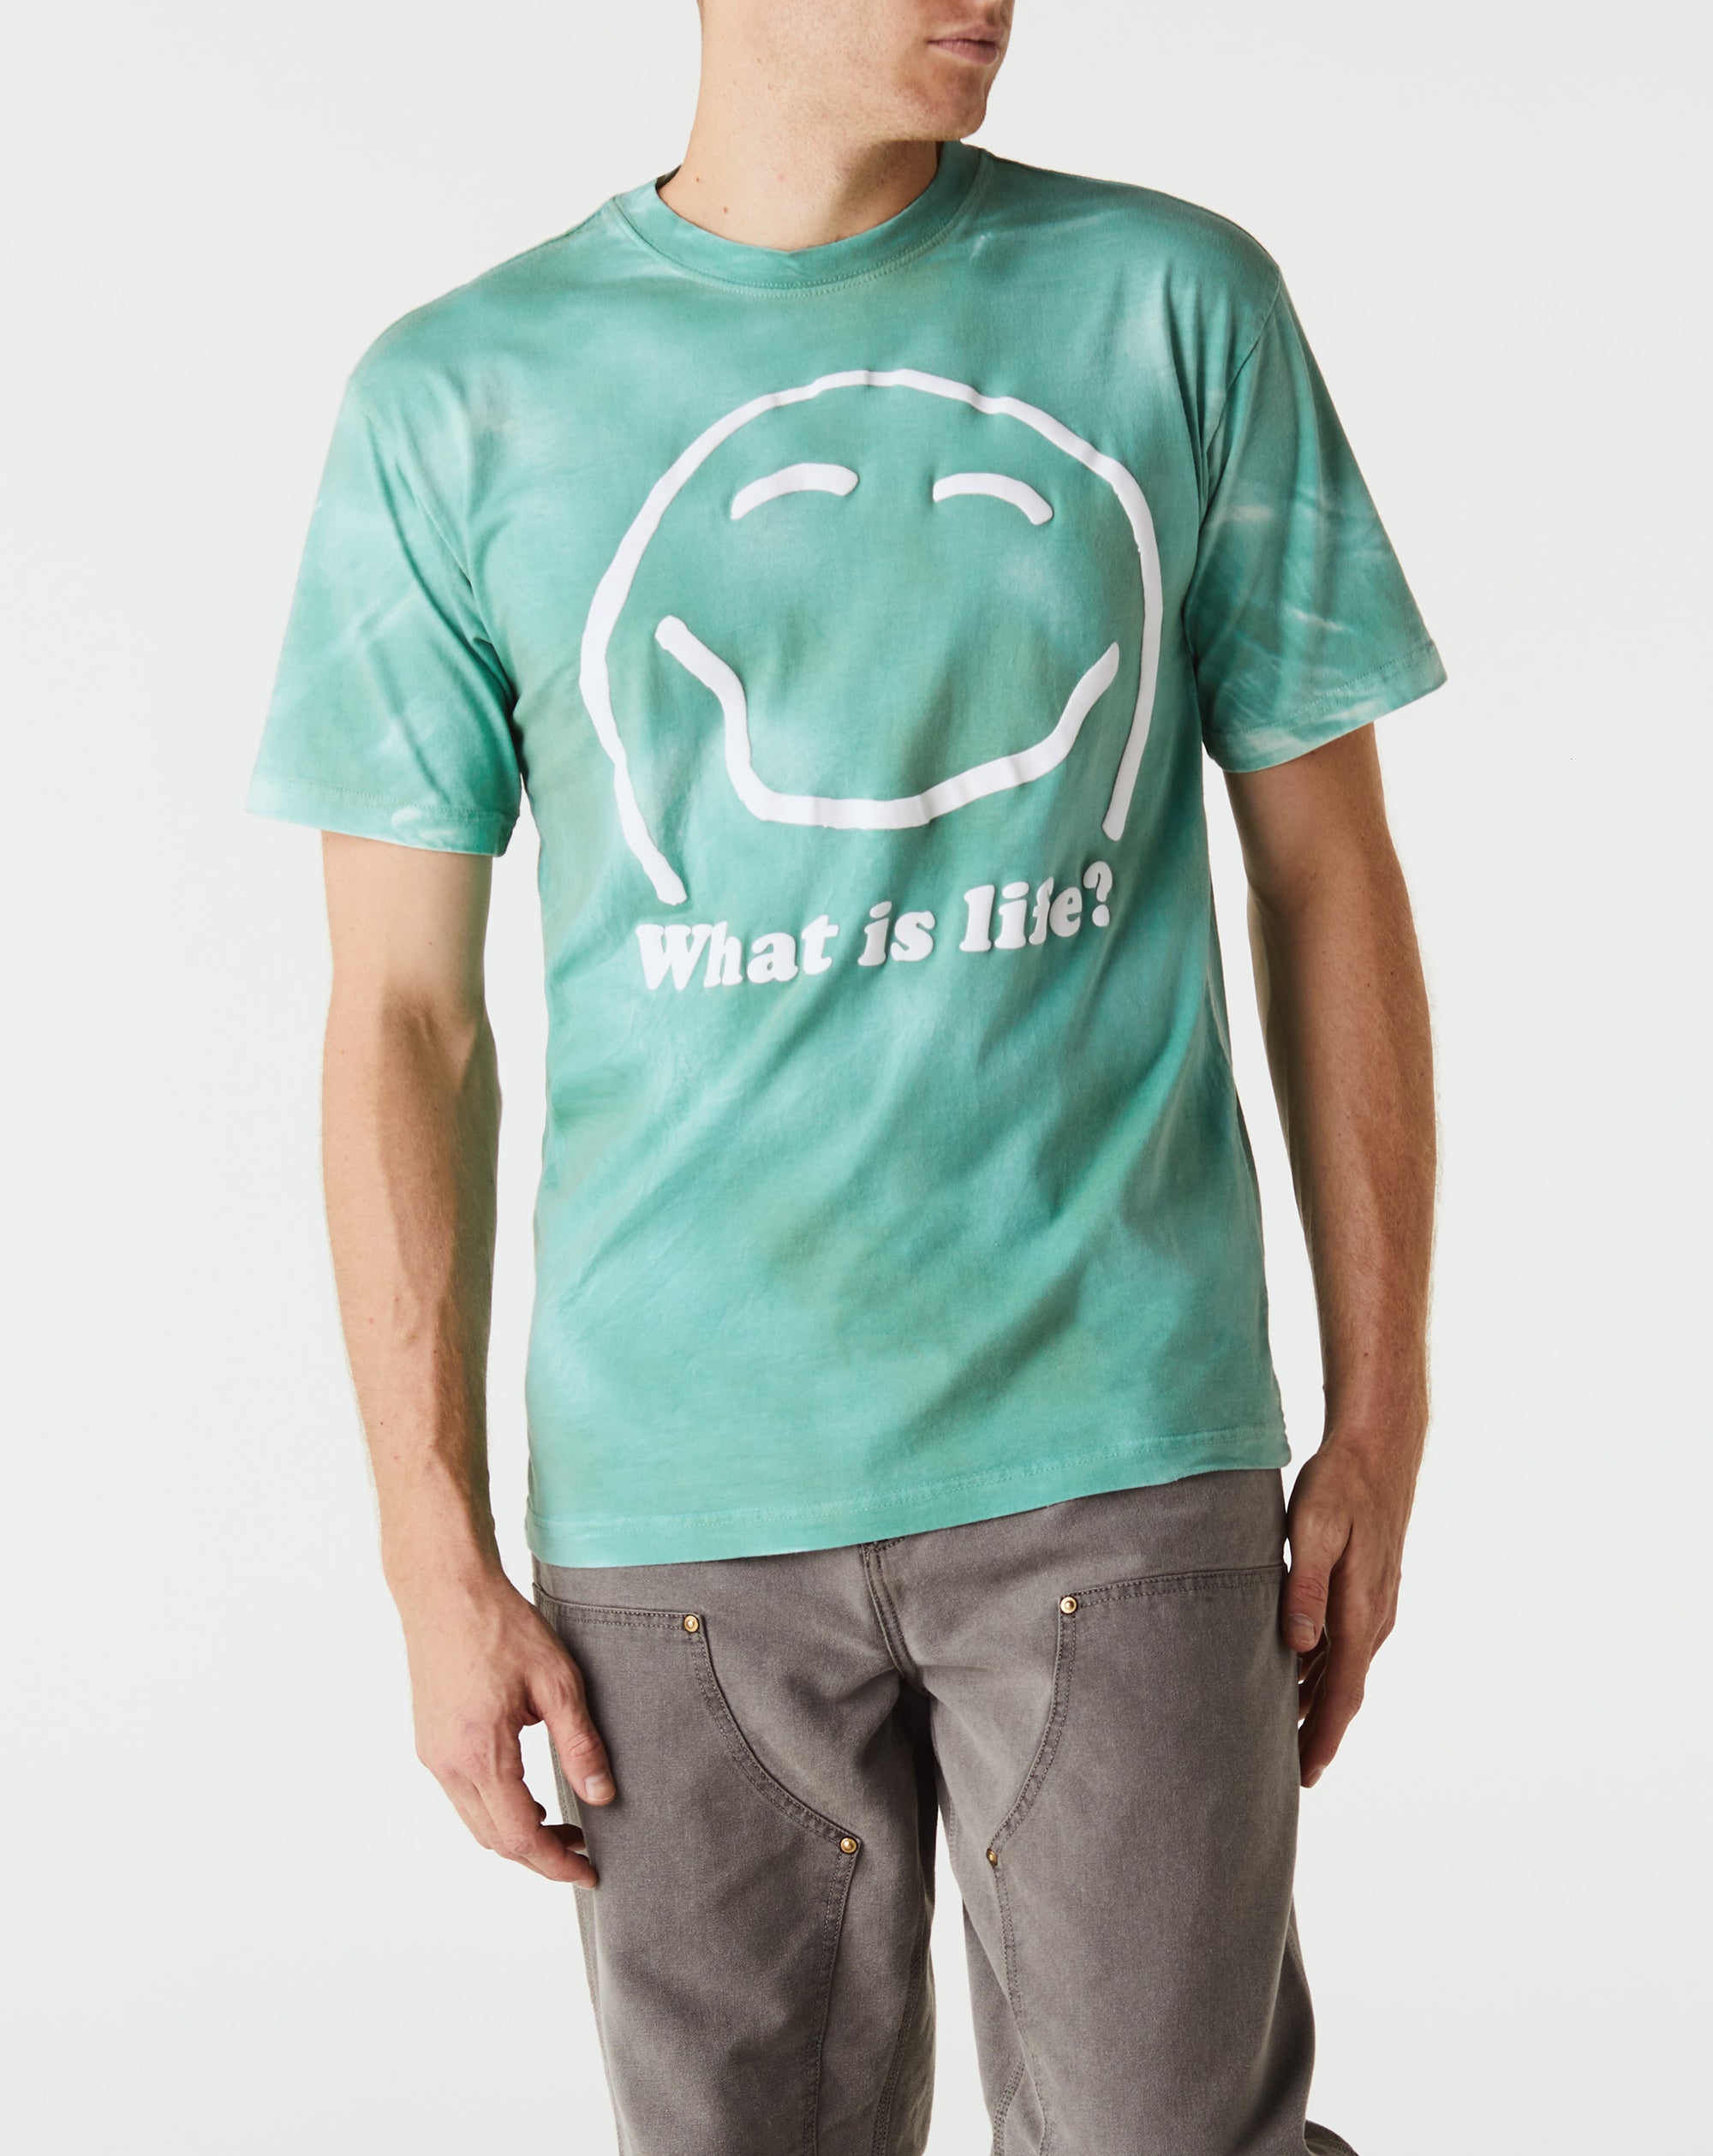 Market What Is Life T-Shirt - Rule of Next Apparel